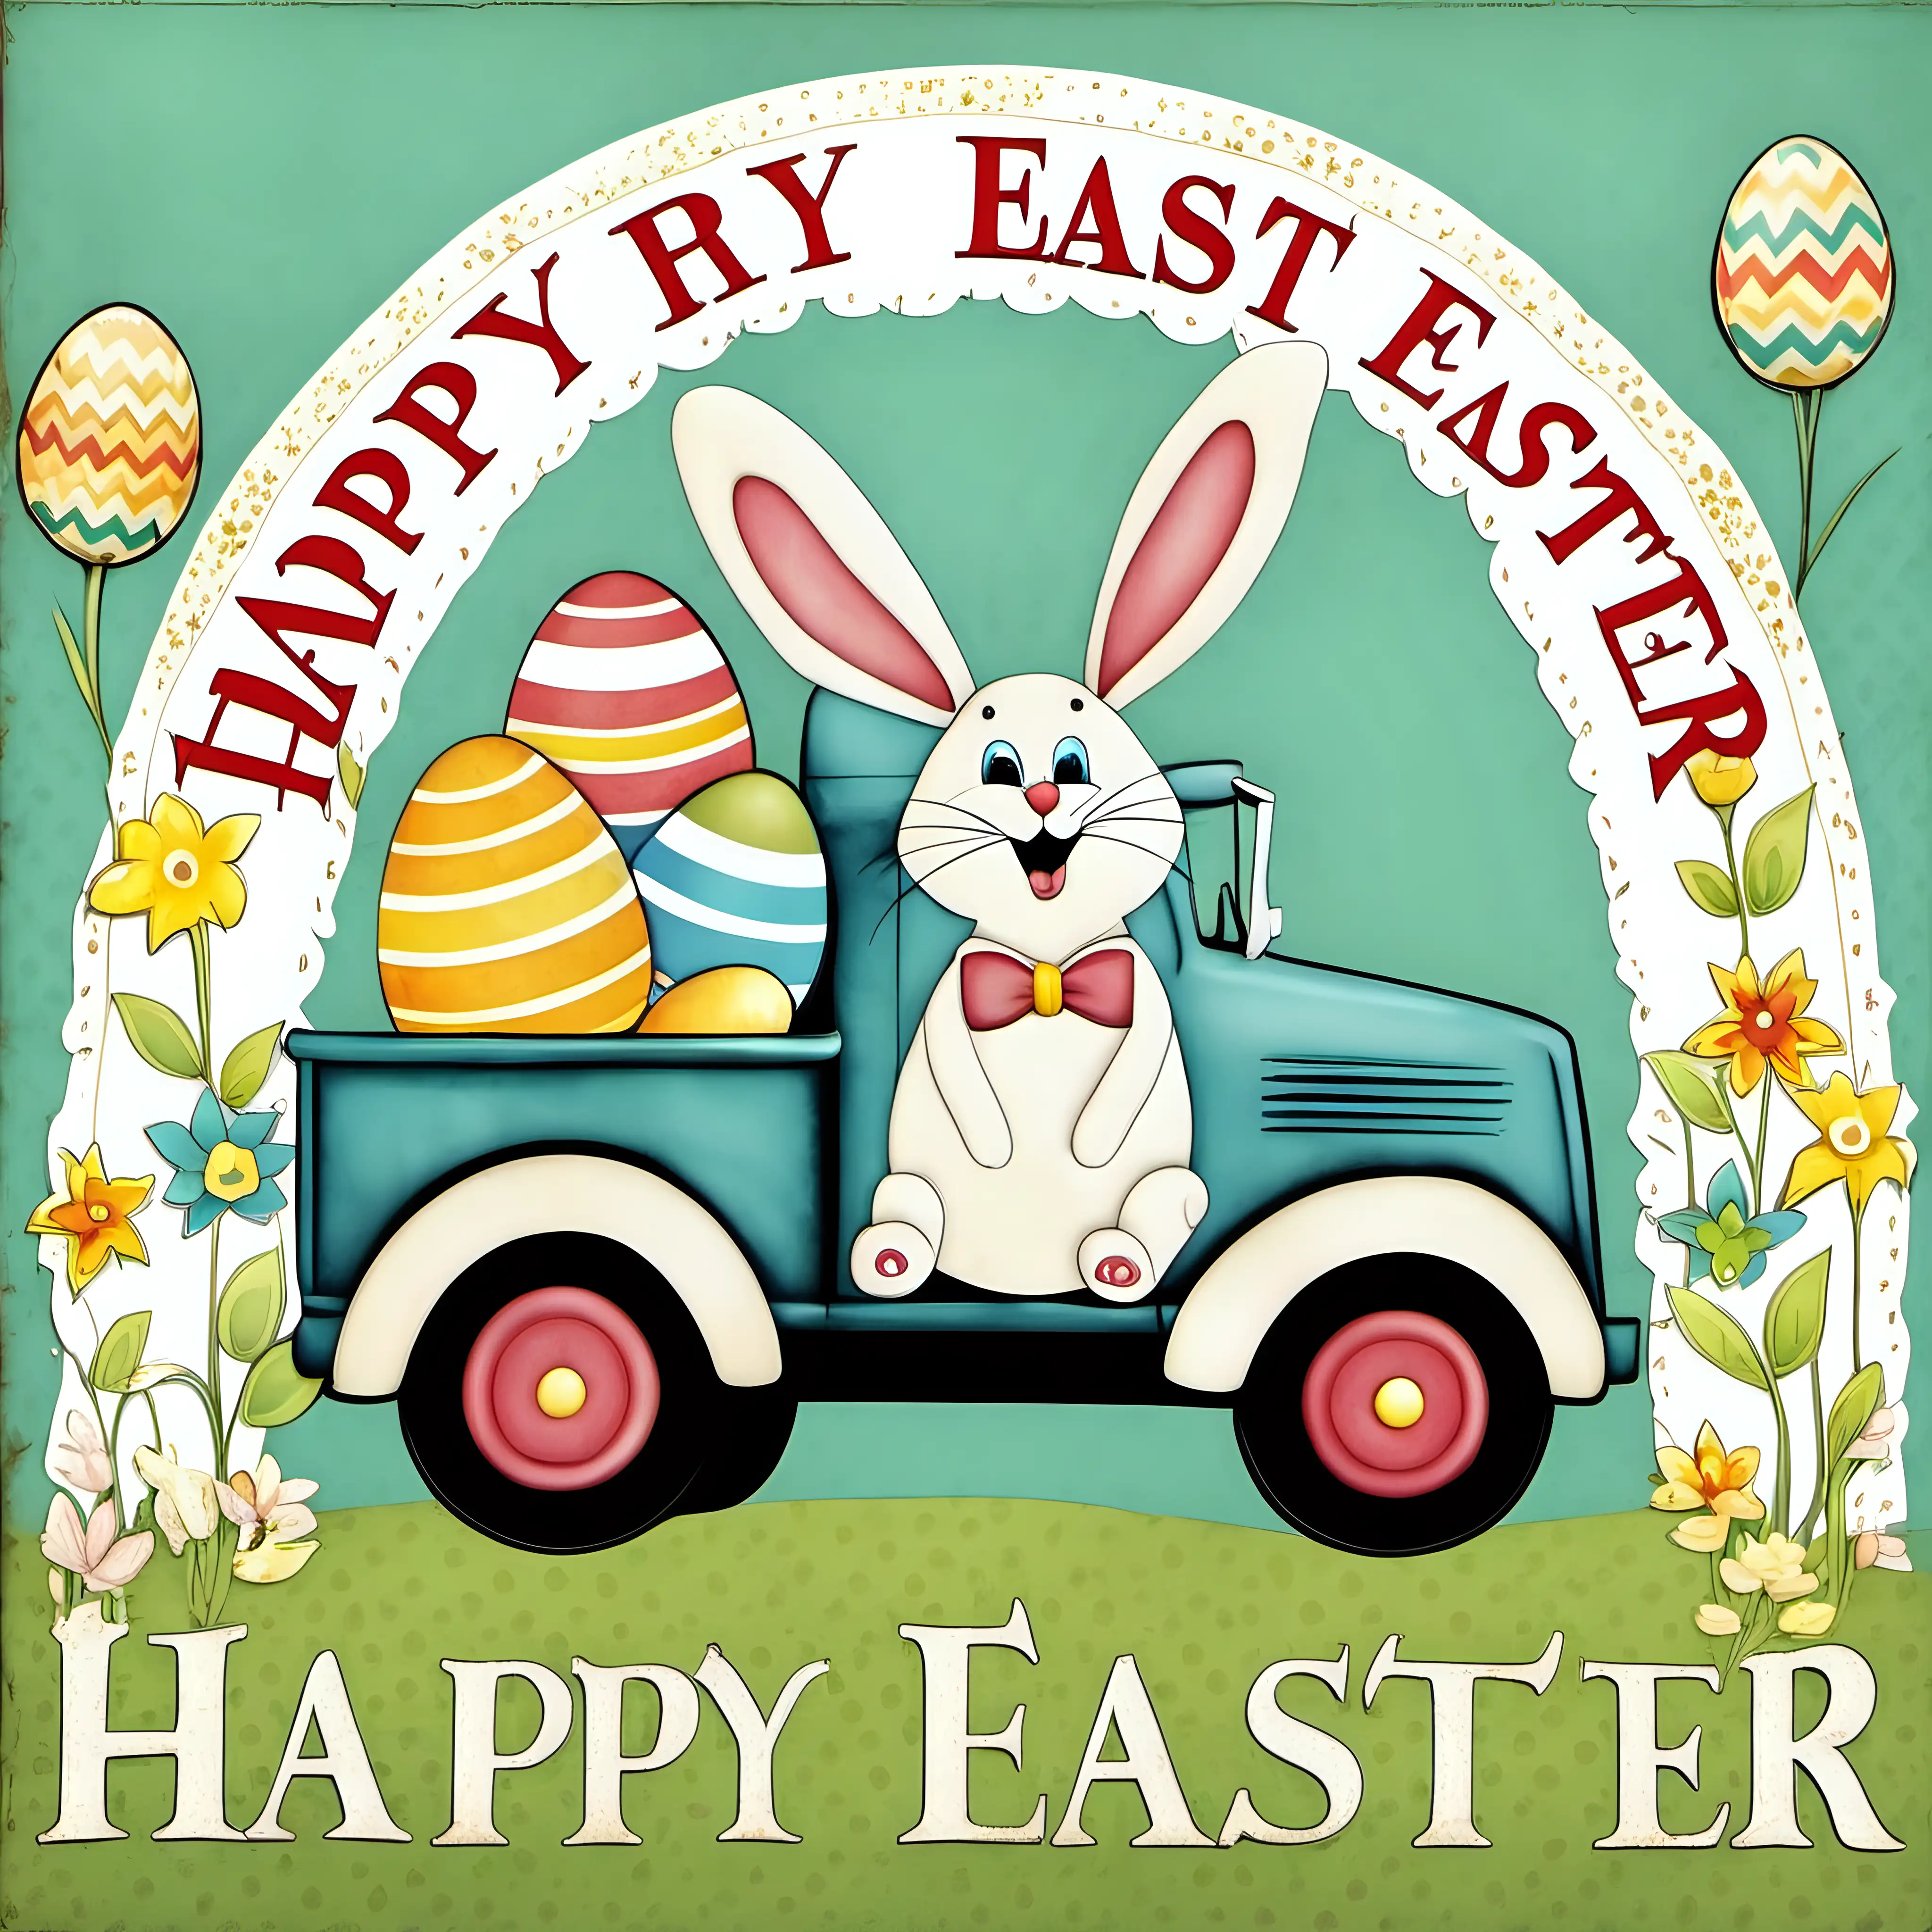 Joyful Easter Celebration with Arched Words Easter Rabbit and a Truck